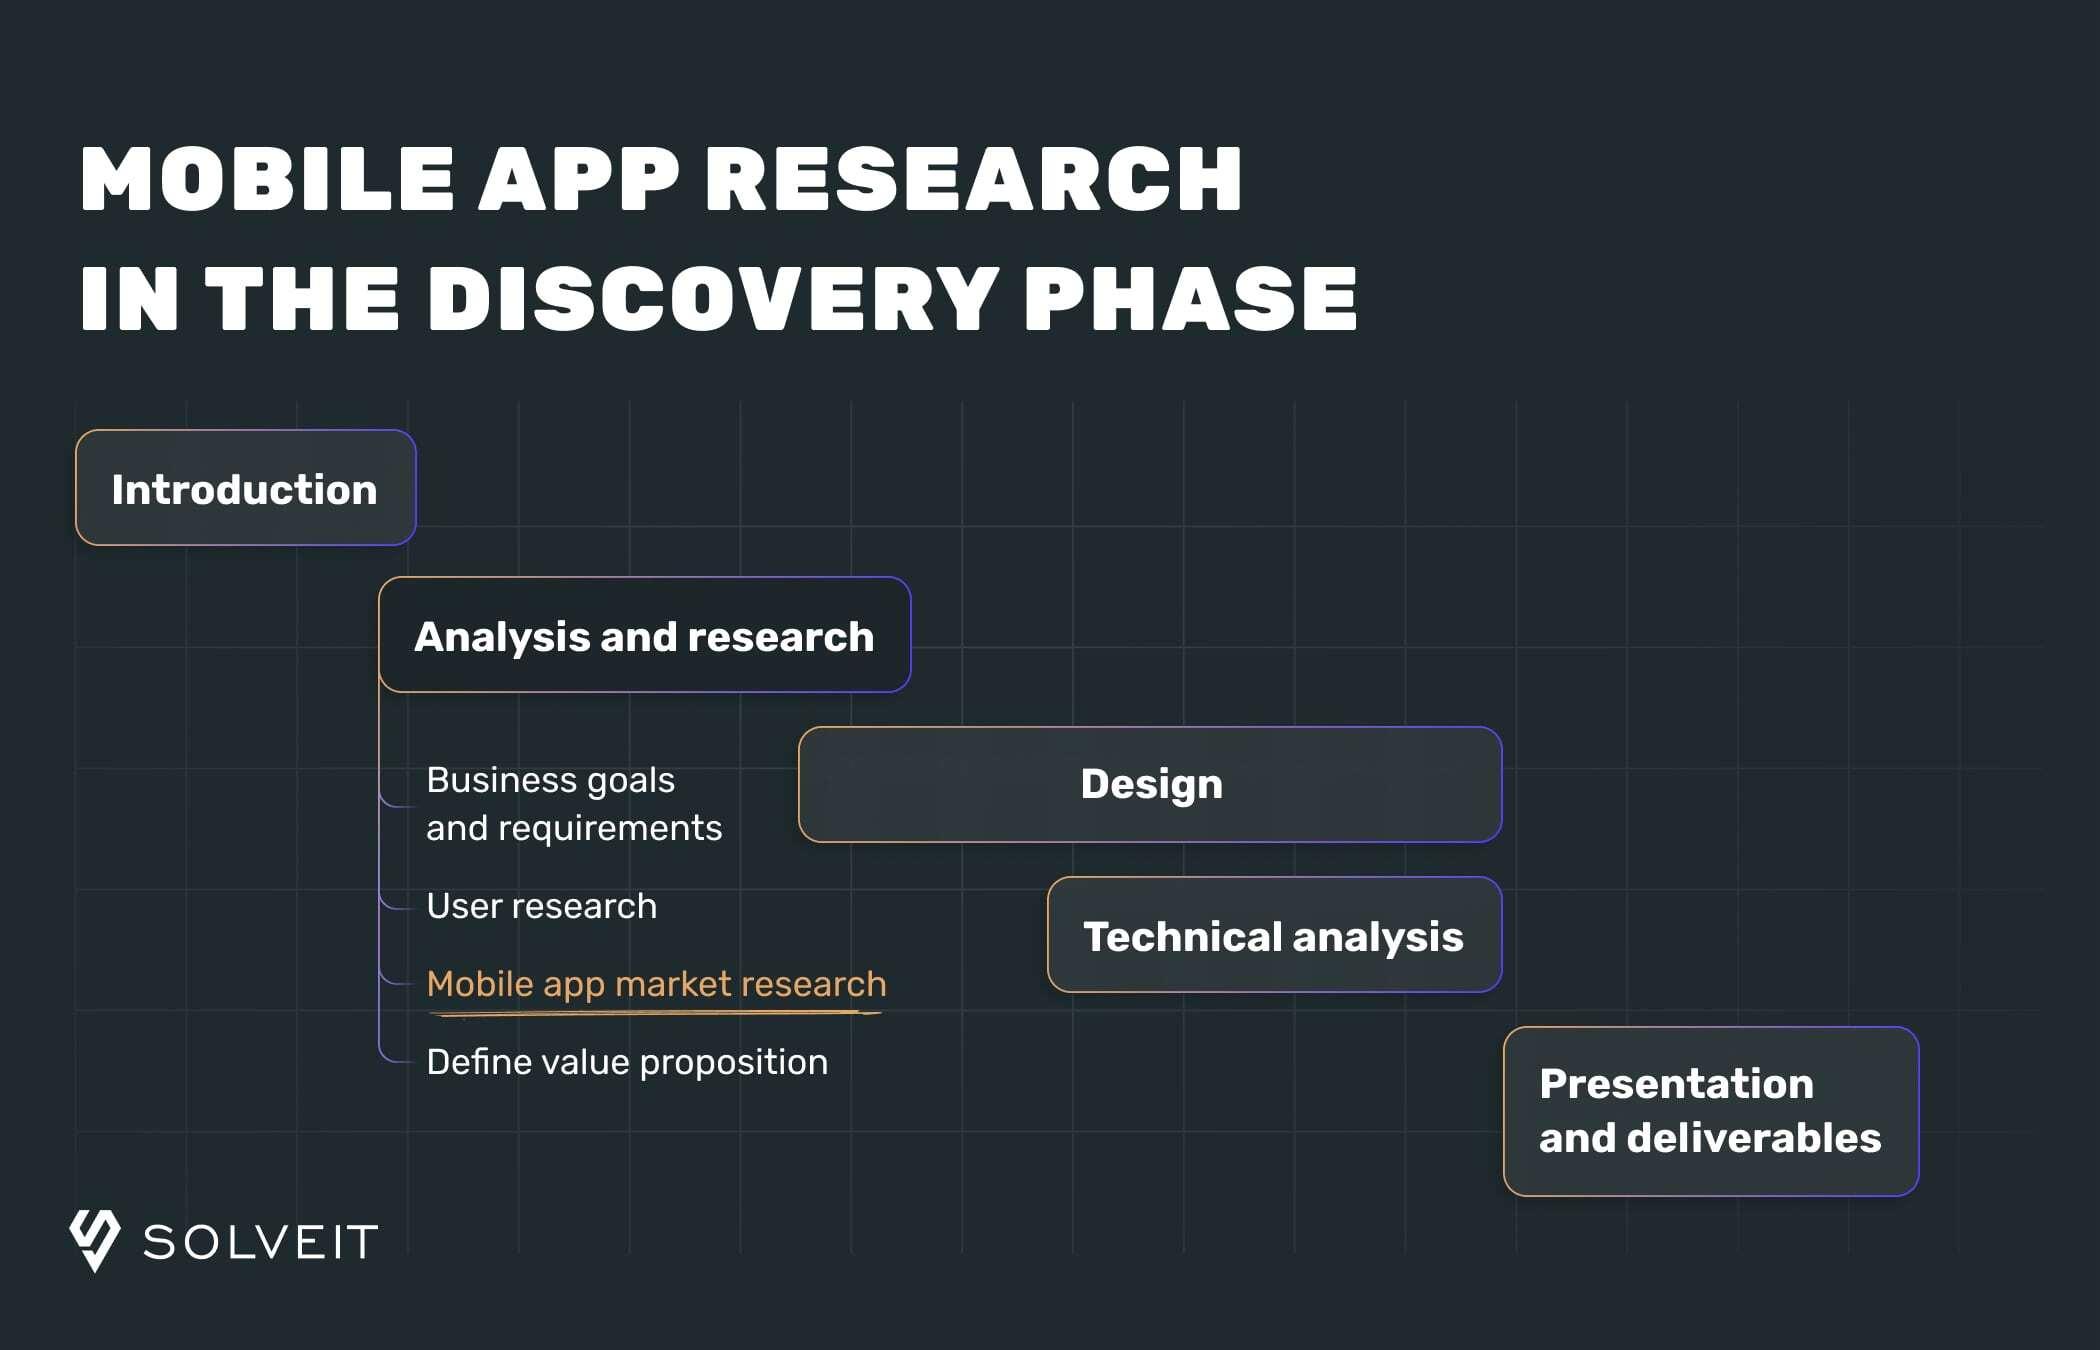 Market research for mobile app development within the discovery phase